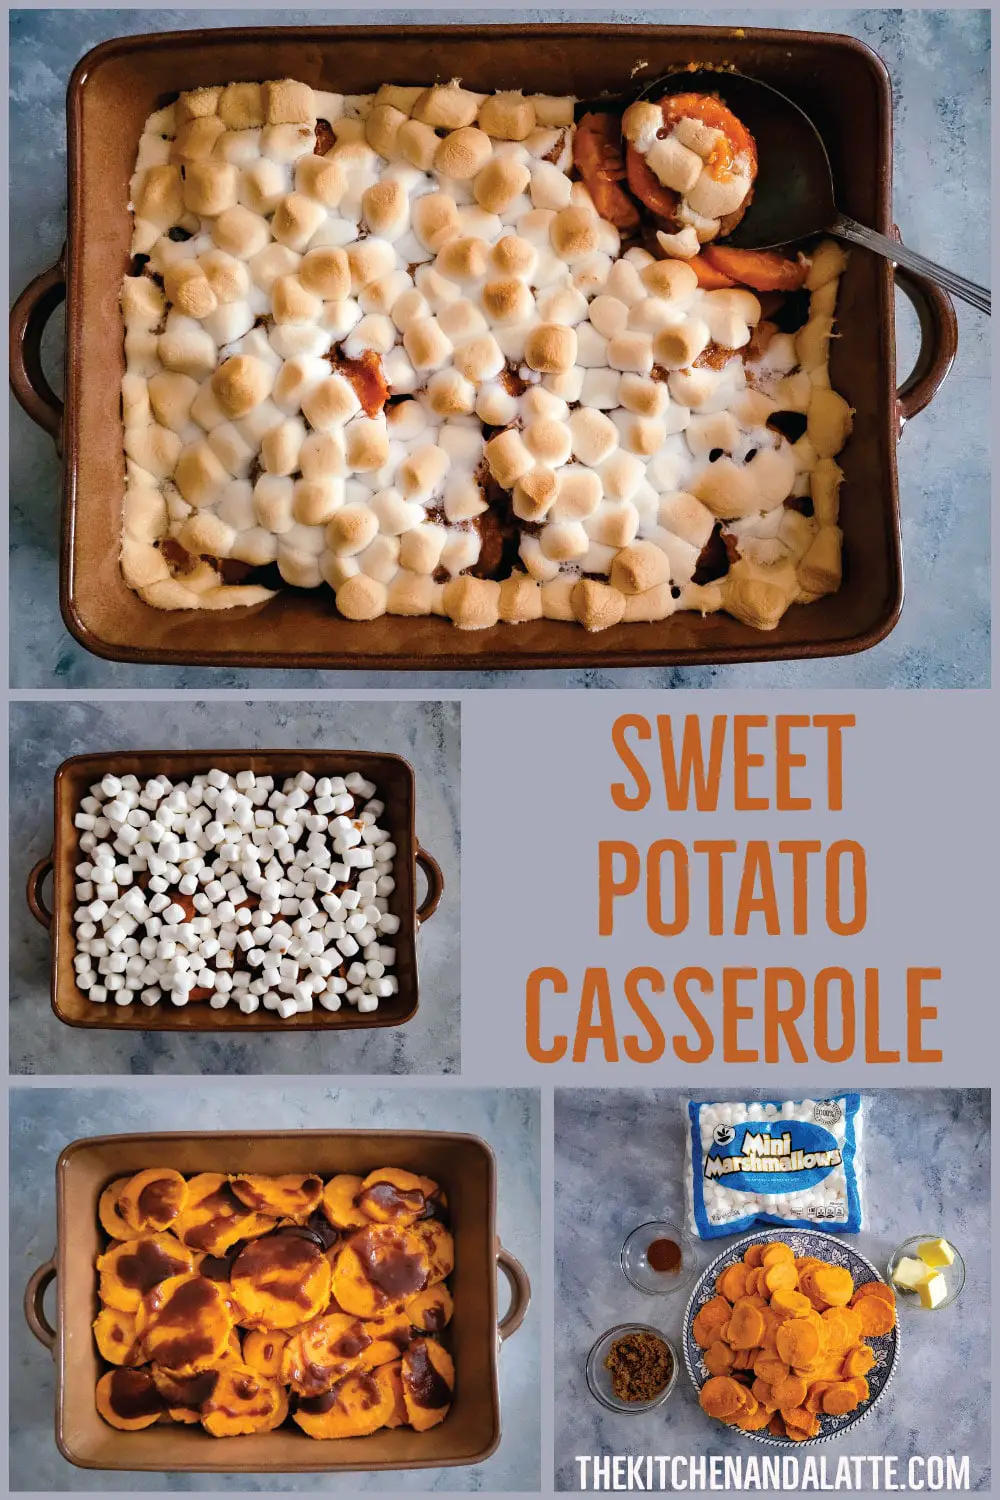 Sweet potato casserole Pinterest graphic. 4 images with steps to make the casserole. 1 is ingredients - marshmallows, brown sugar, butter, cinnamon and sweet potatoes. 1 has sliced sweet potatoes with butter and brown sugar drizzled over. 1 is adding the marshmallows and the other is the casserole after baking.